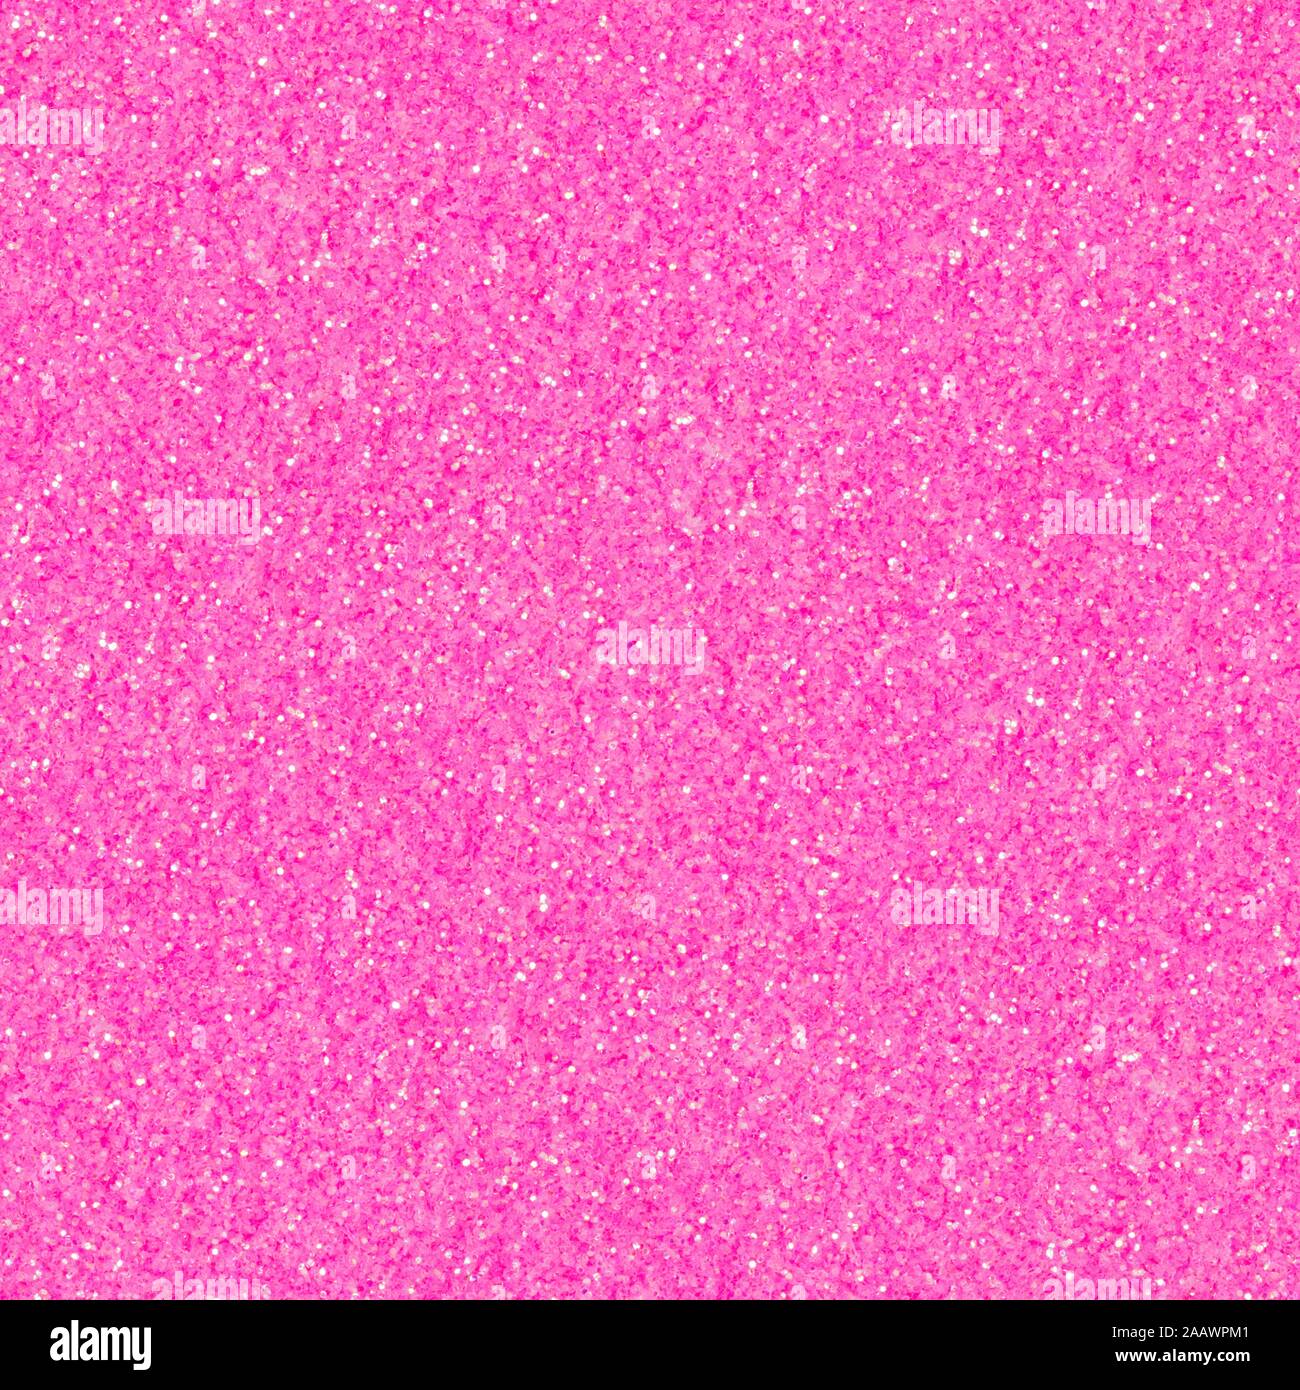 Light Pastel Pink Glitter Sparkle And Shine Abstract Background Stock Photo  - Download Image Now - iStock